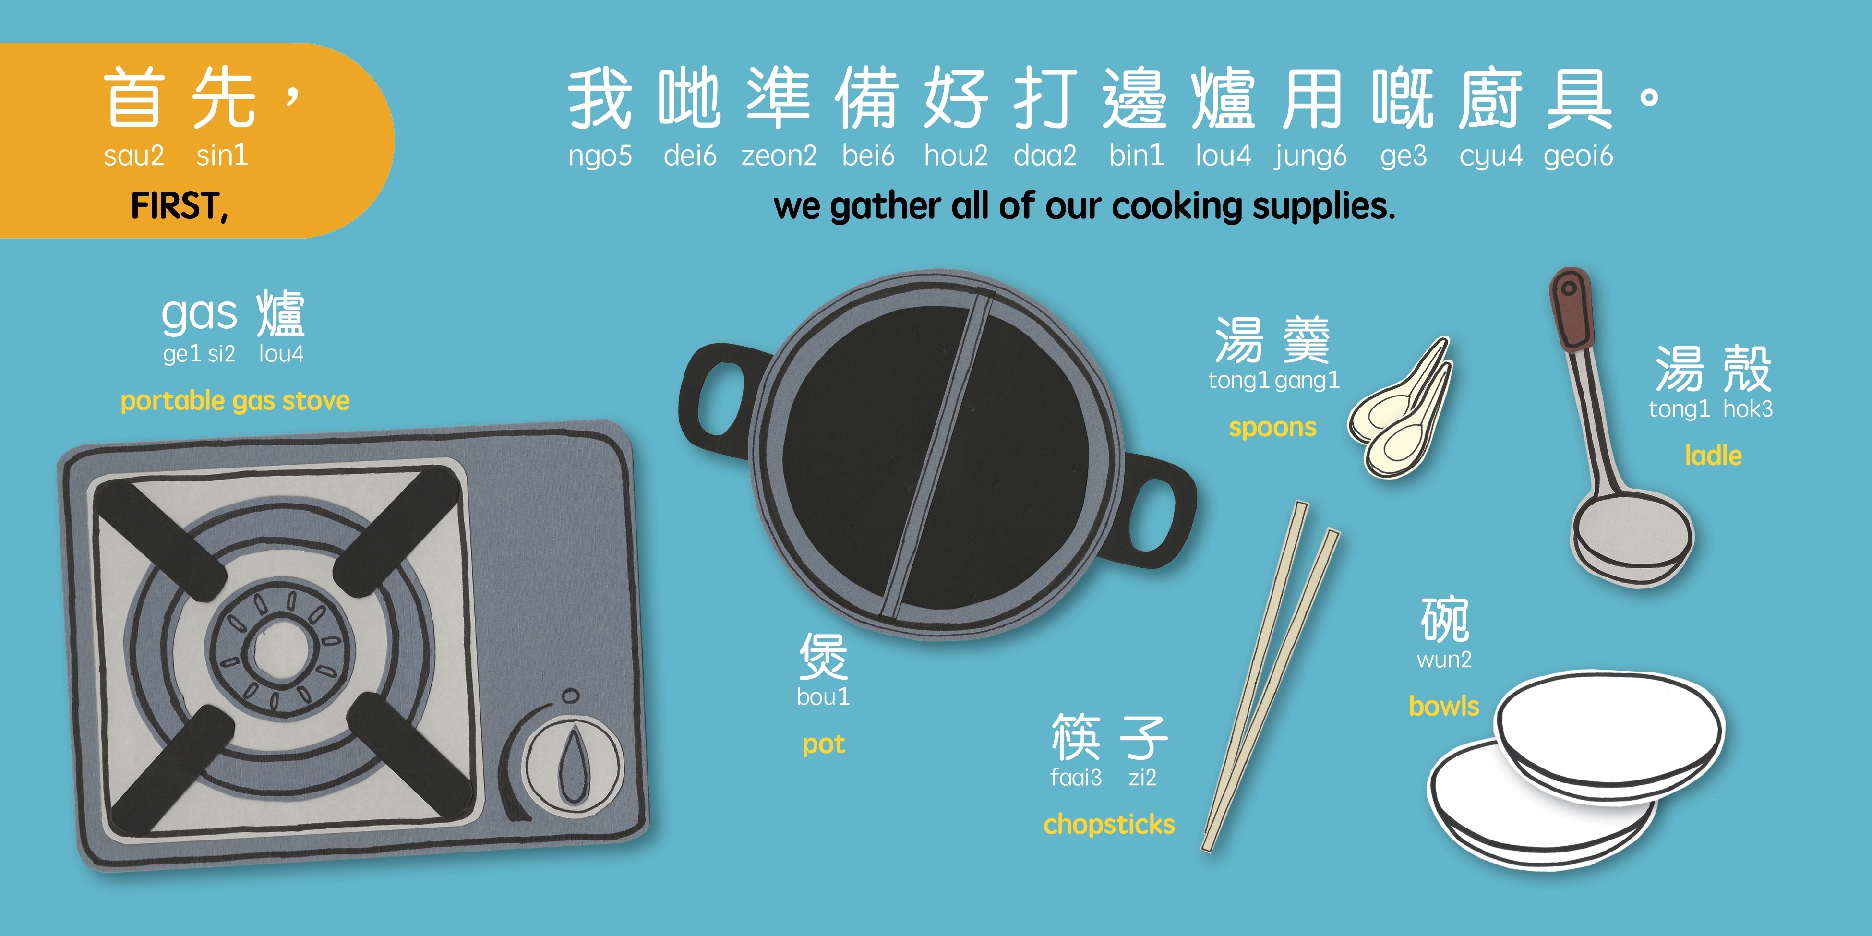 It's Time for Hot Pot - Cantonese